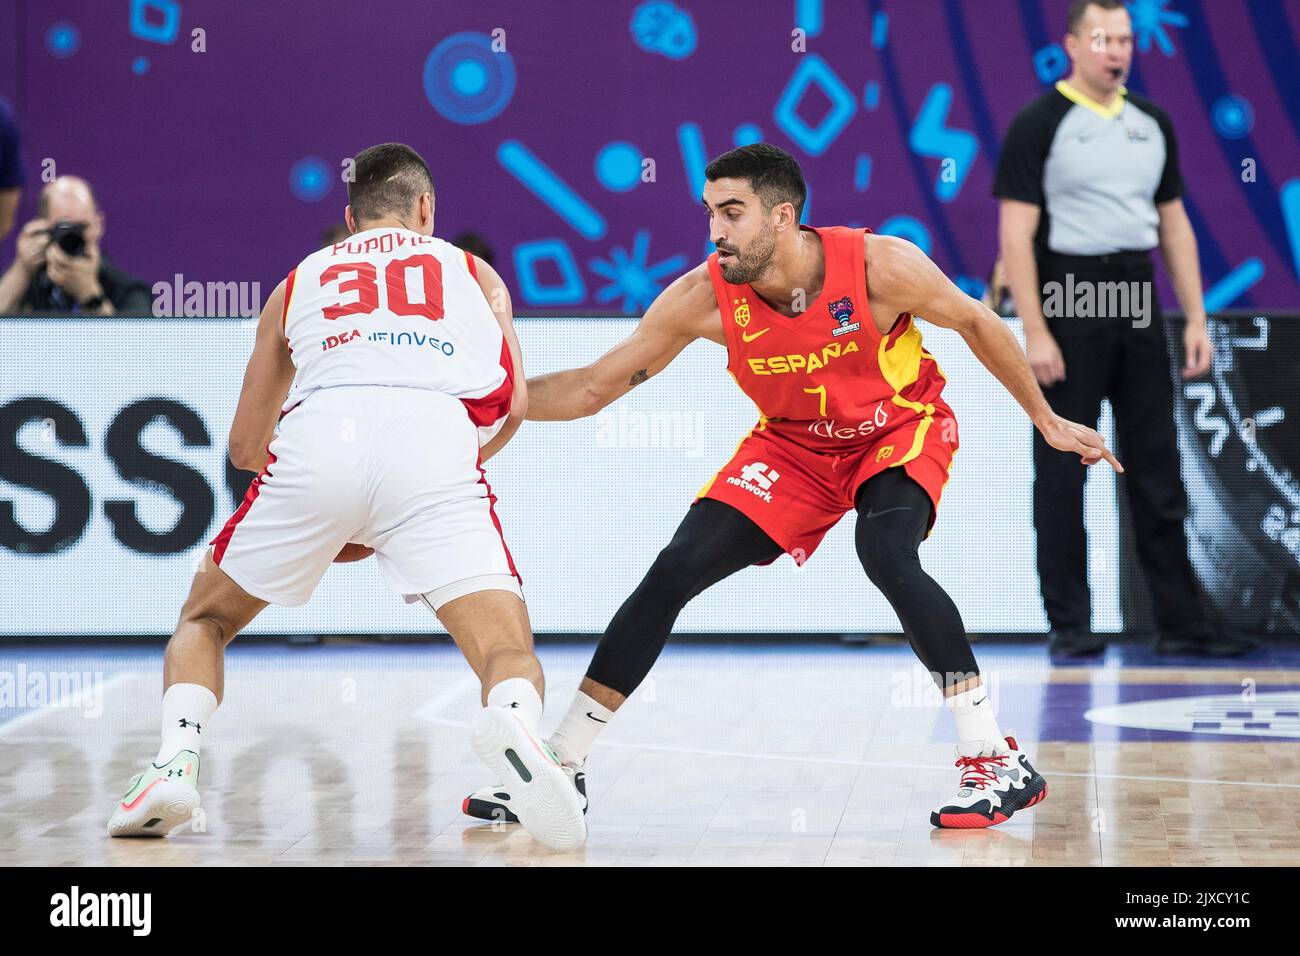 Tbilisi, Georgia, 6th September 2022. Jaime Fernandez of Spain defending during the FIBA EuroBasket 2022 group A match between Montenegro and Spain at Tbilisi Arena in Tbilisi, Georgia. September 6, 2022. Credit: Nikola Krstic/Alamy Stock Photo